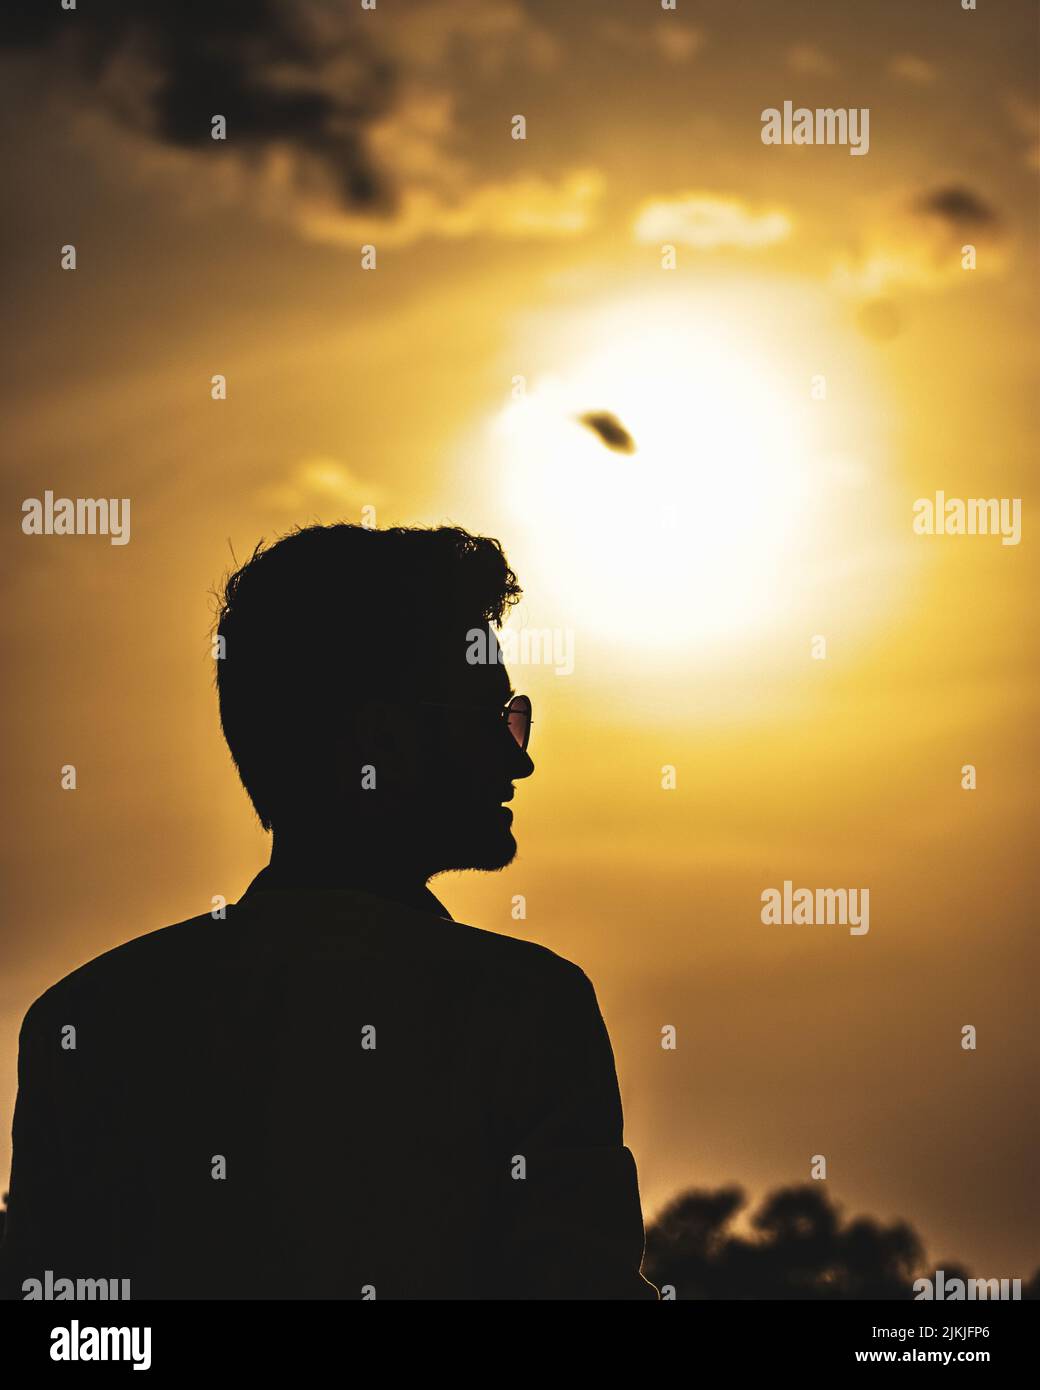 A silhouette of male against a beautiful sunset background Stock Photo